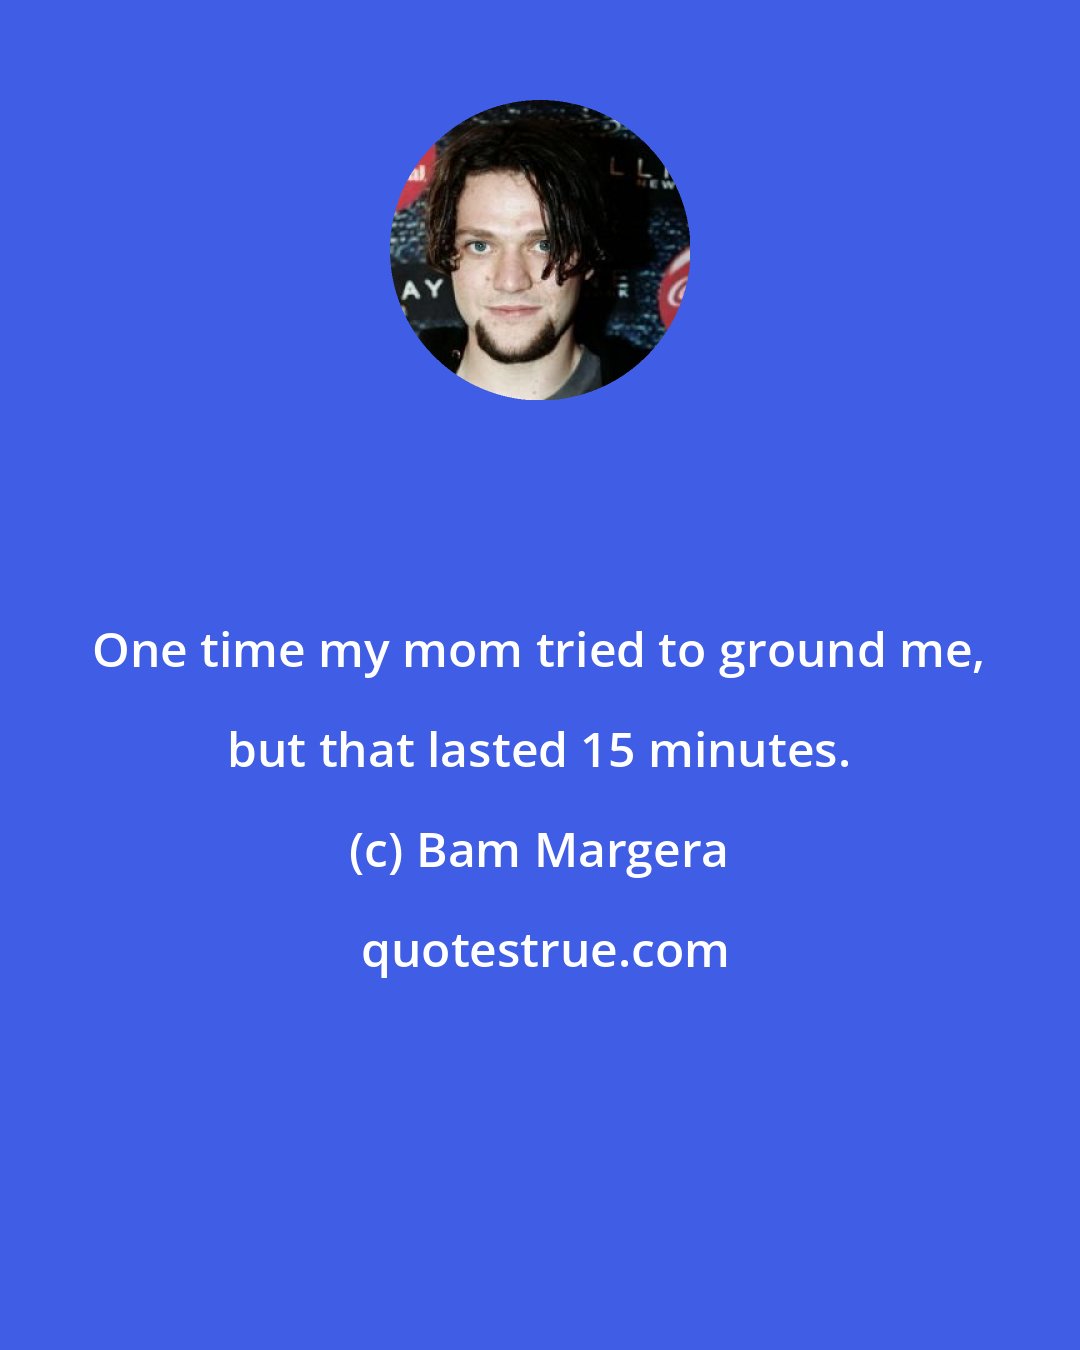 Bam Margera: One time my mom tried to ground me, but that lasted 15 minutes.